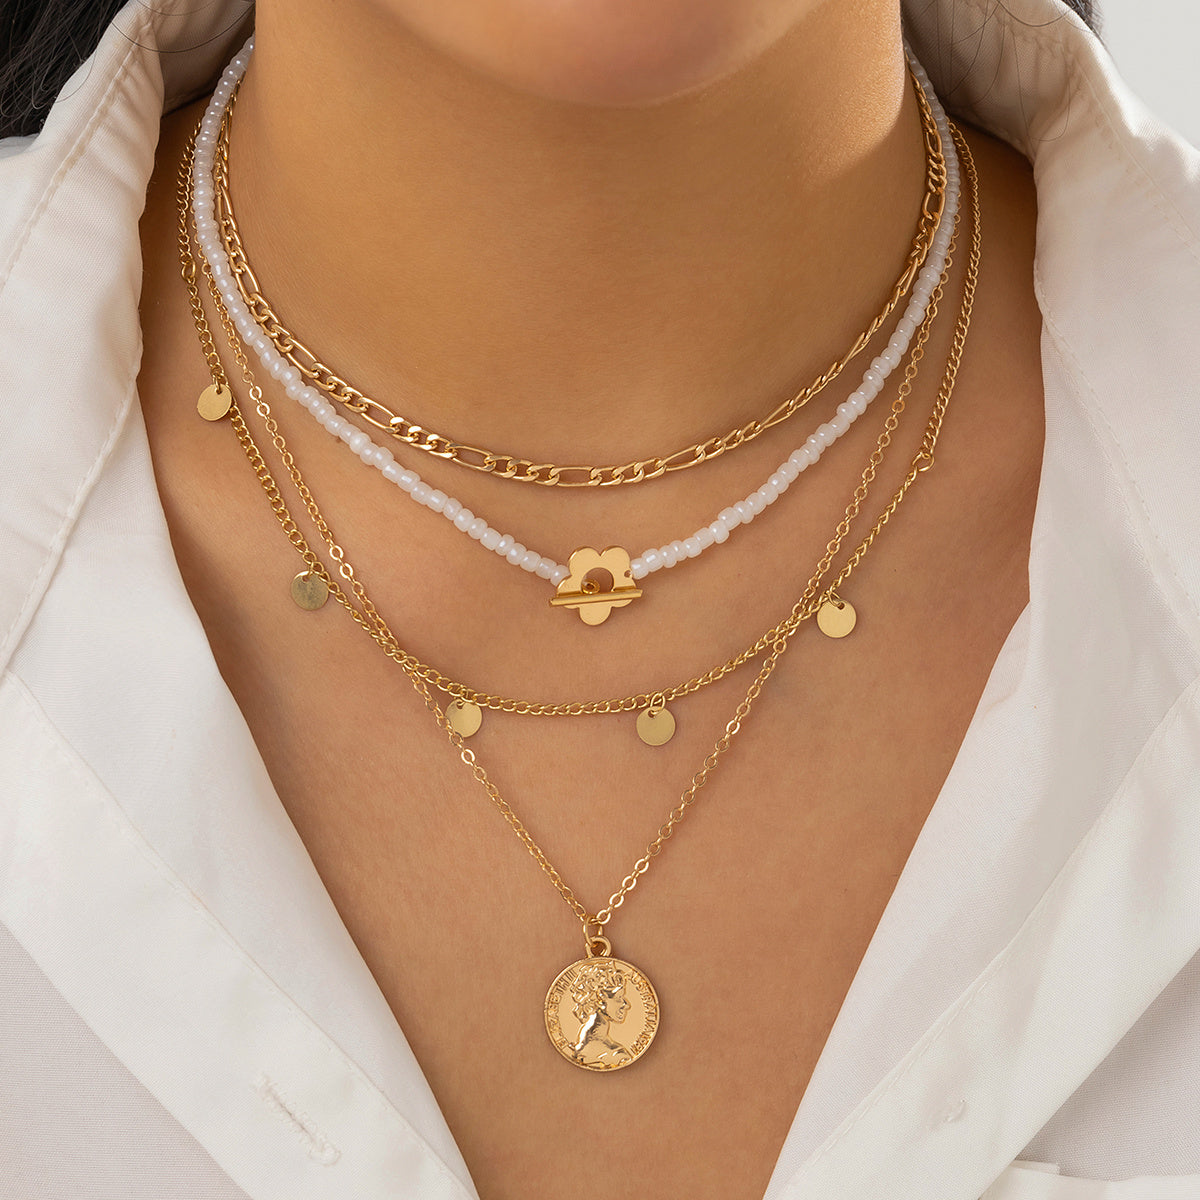 Gorgeous Multi-Layer Chain Necklace with Coin Pendant - Perfect Graduation Gift for Women!